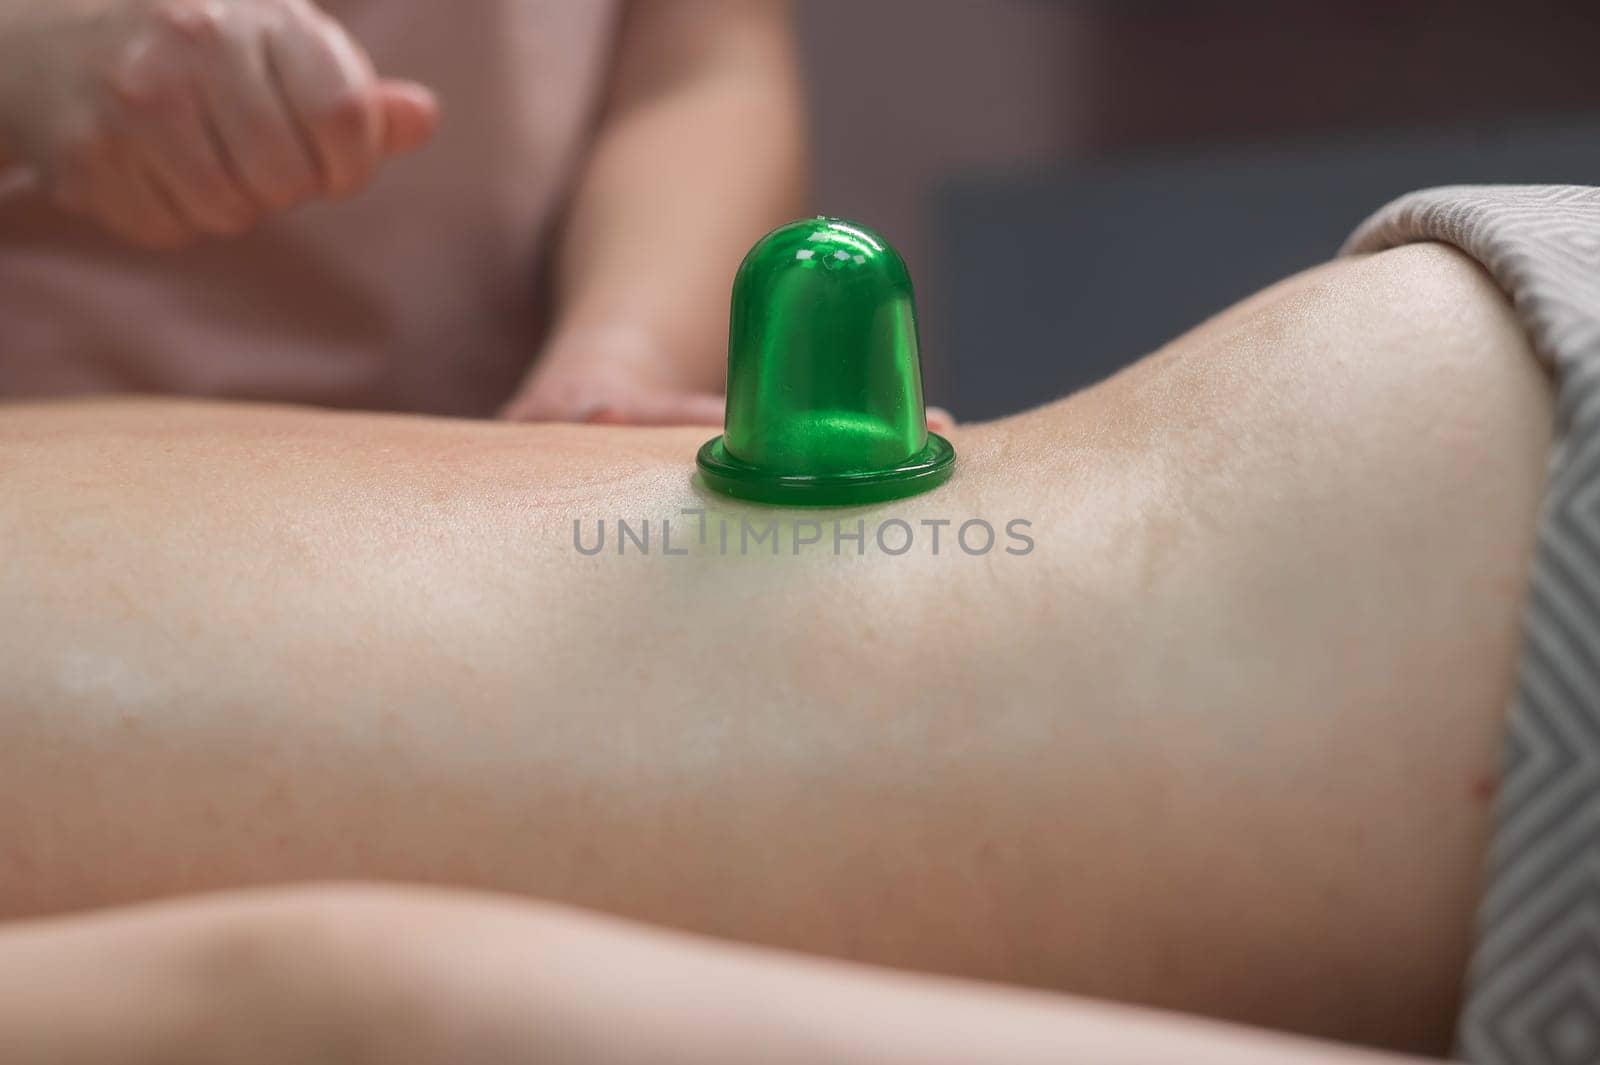 A woman undergoes an anti-cellulite massage procedure using a vacuum jar. Close-up of the lower back